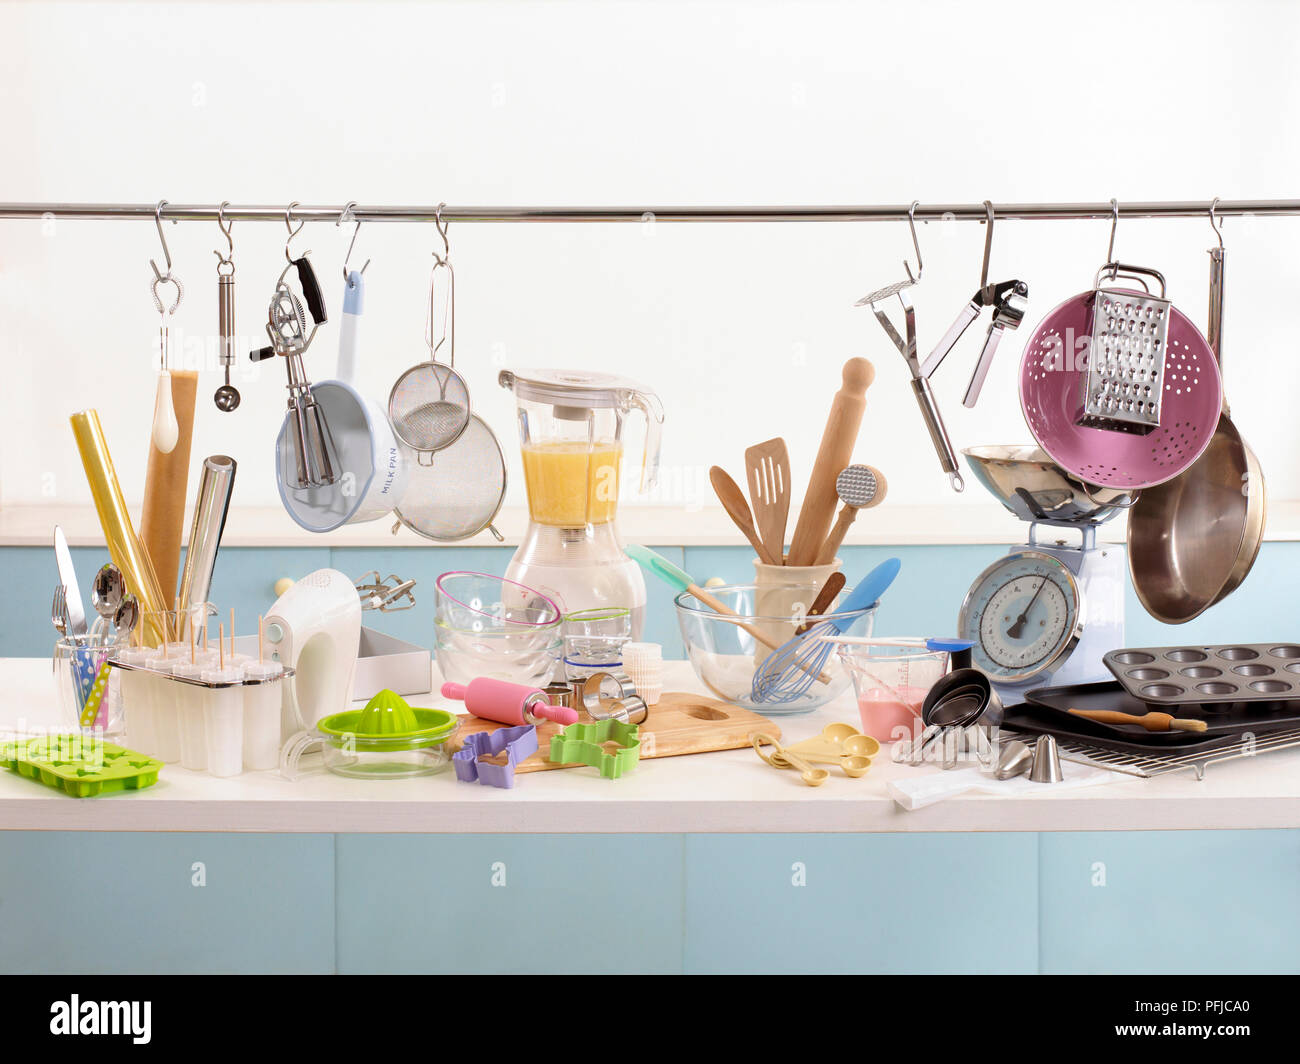 Various cooking and baking utensils on shelf and hanging from rail Stock Photo